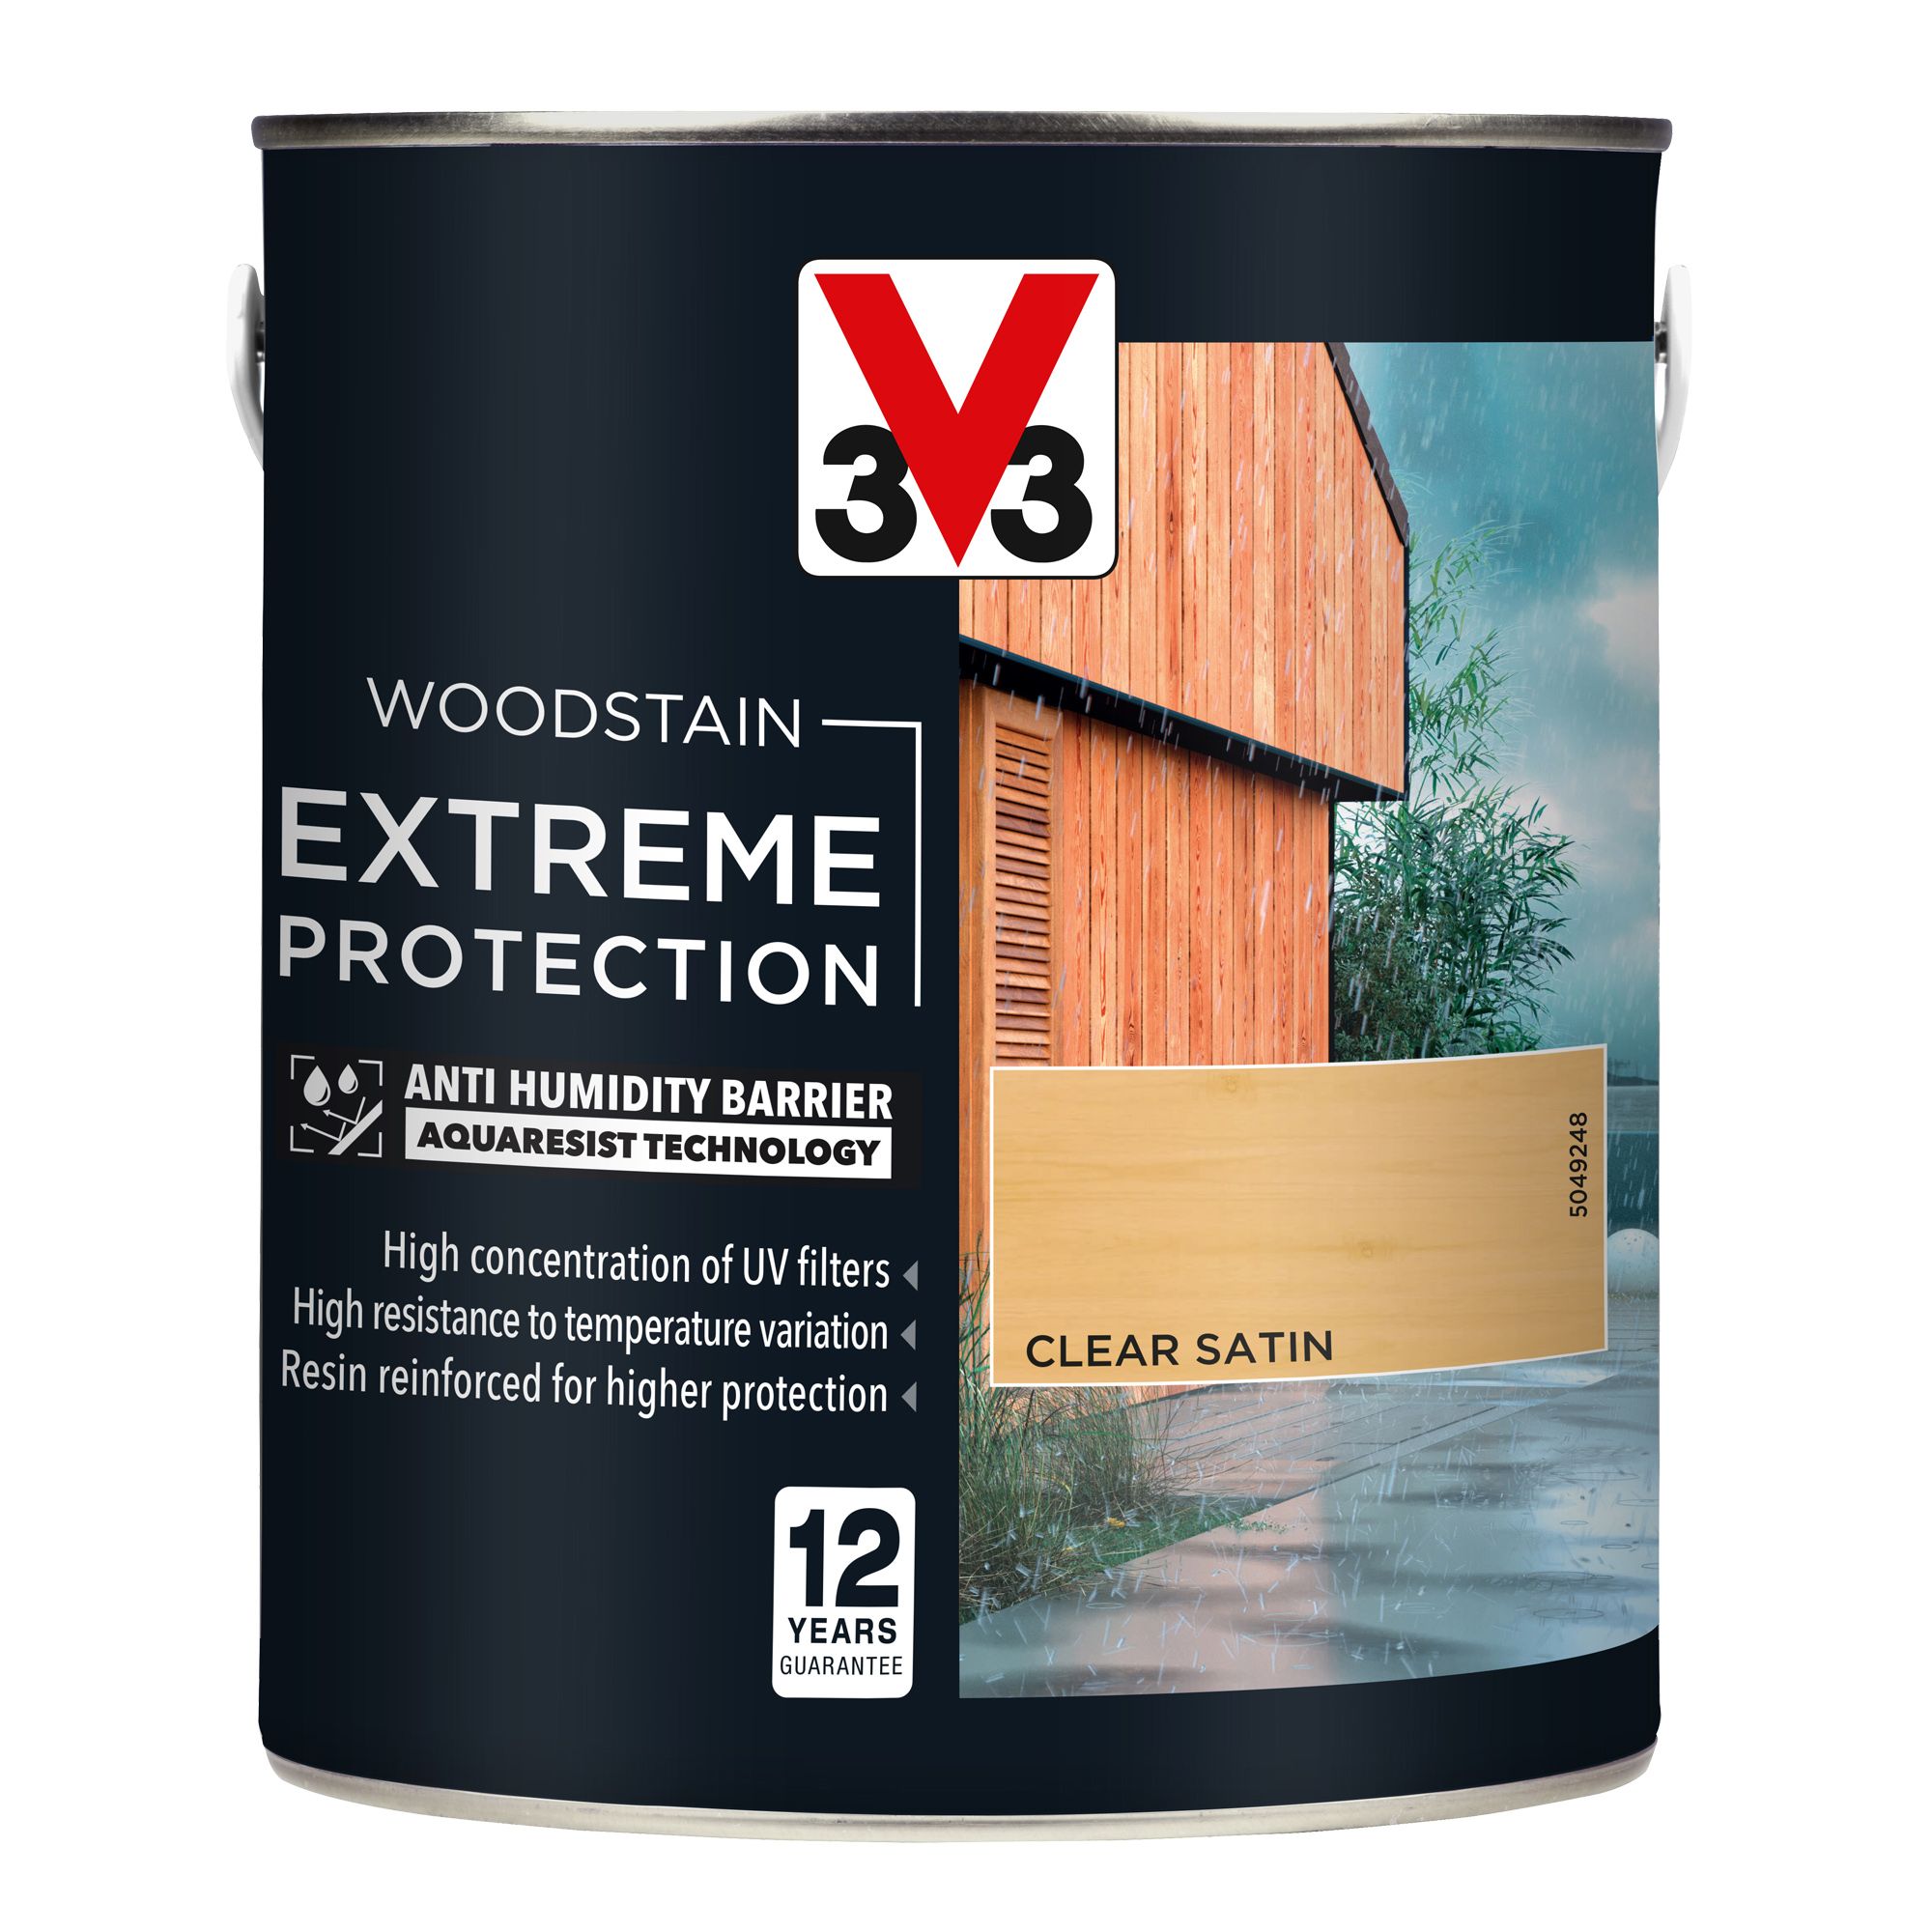 V33 Extreme protection Clear Satin Wood stain, 2.5L